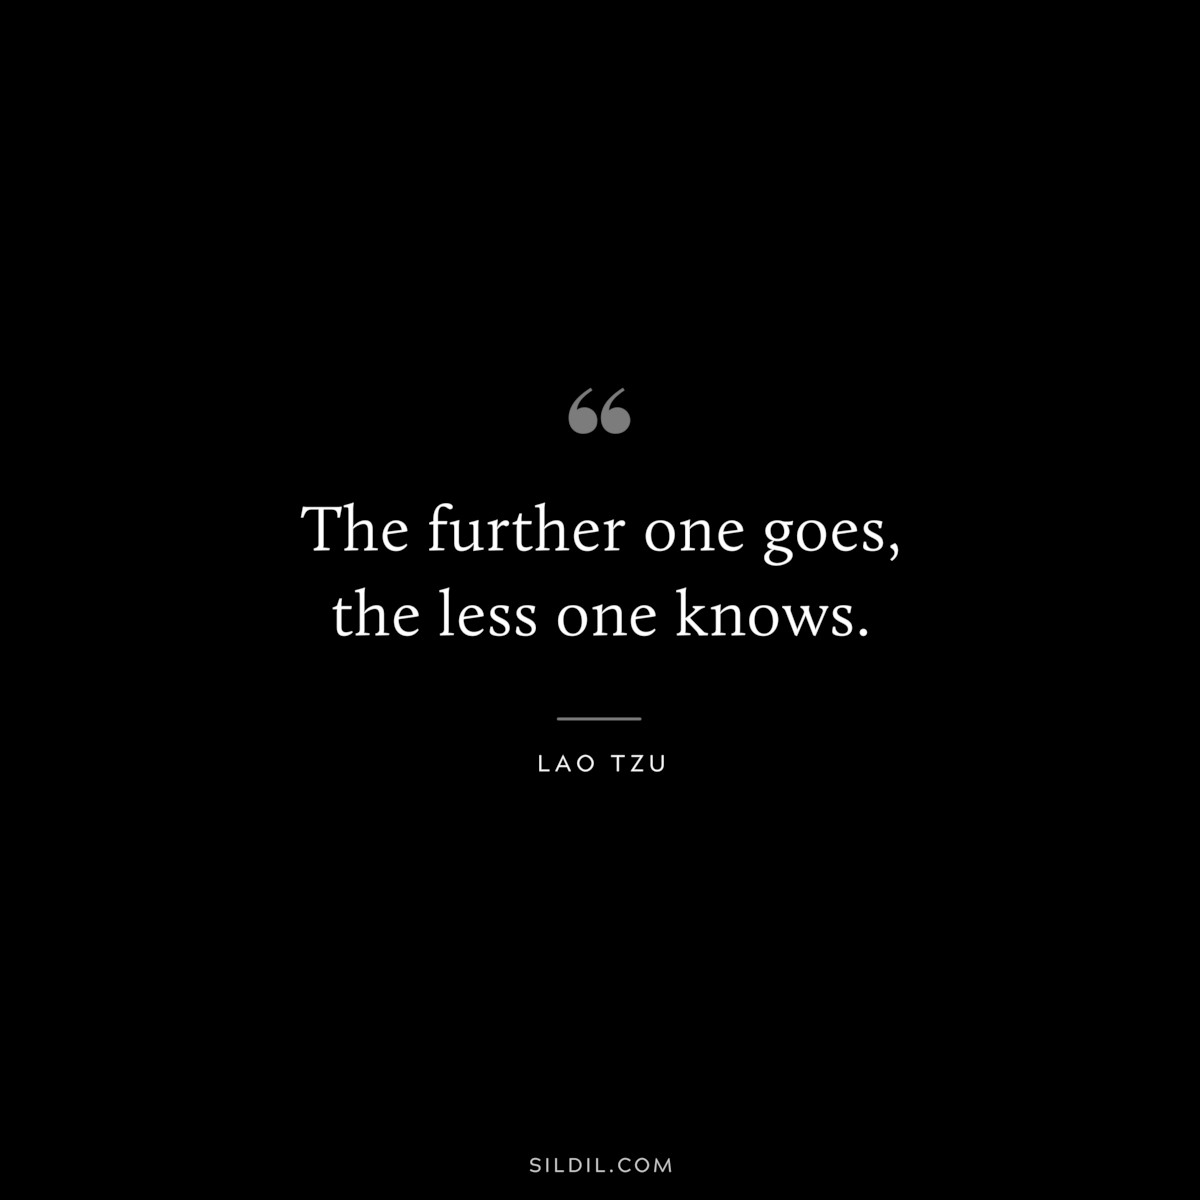 The further one goes, the less one knows. ― Lao Tzu